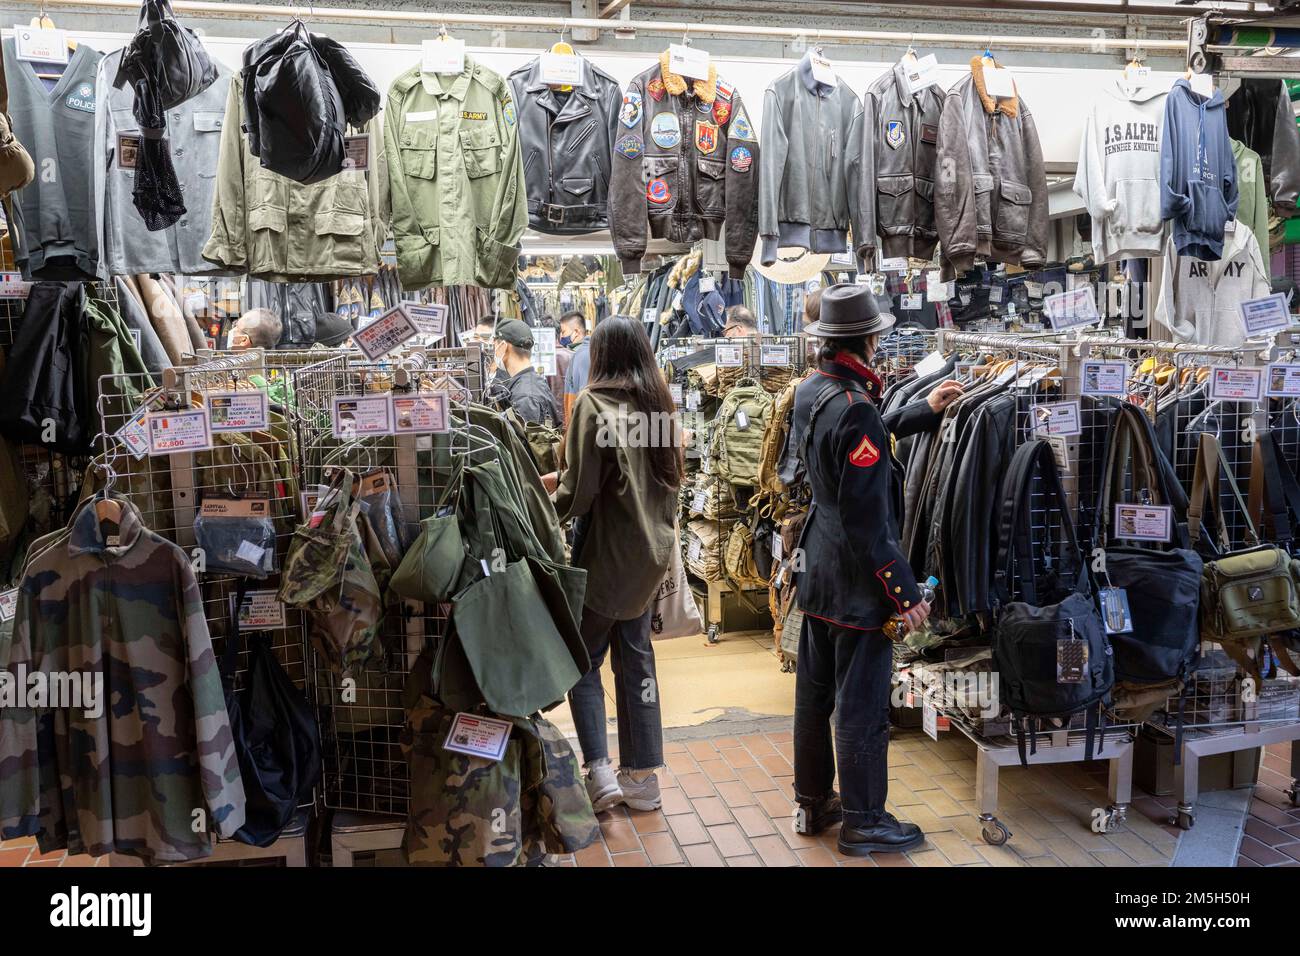 Tokyo, Japan. 4th Nov, 2022. A Tokyoite in U.S. Marine Corps dress blues shopping at a U.S. military uniform-themed Army Navy surplus shop selling camouflaged fatigues and military clothing jackets for fashion in the markets under the JR East lines in Ueno.Japan has recently reopened to tourism after over two years of travel bans due to the COVID-19 pandemic. The Yen has greatly depreciated against the USD US Dollar, creating economic turmoil for international trade and the Japanese economy. Japan also is now experiencing a daily count of over 100,000 new COVID-19 cases a day, with Tokyo Stock Photo